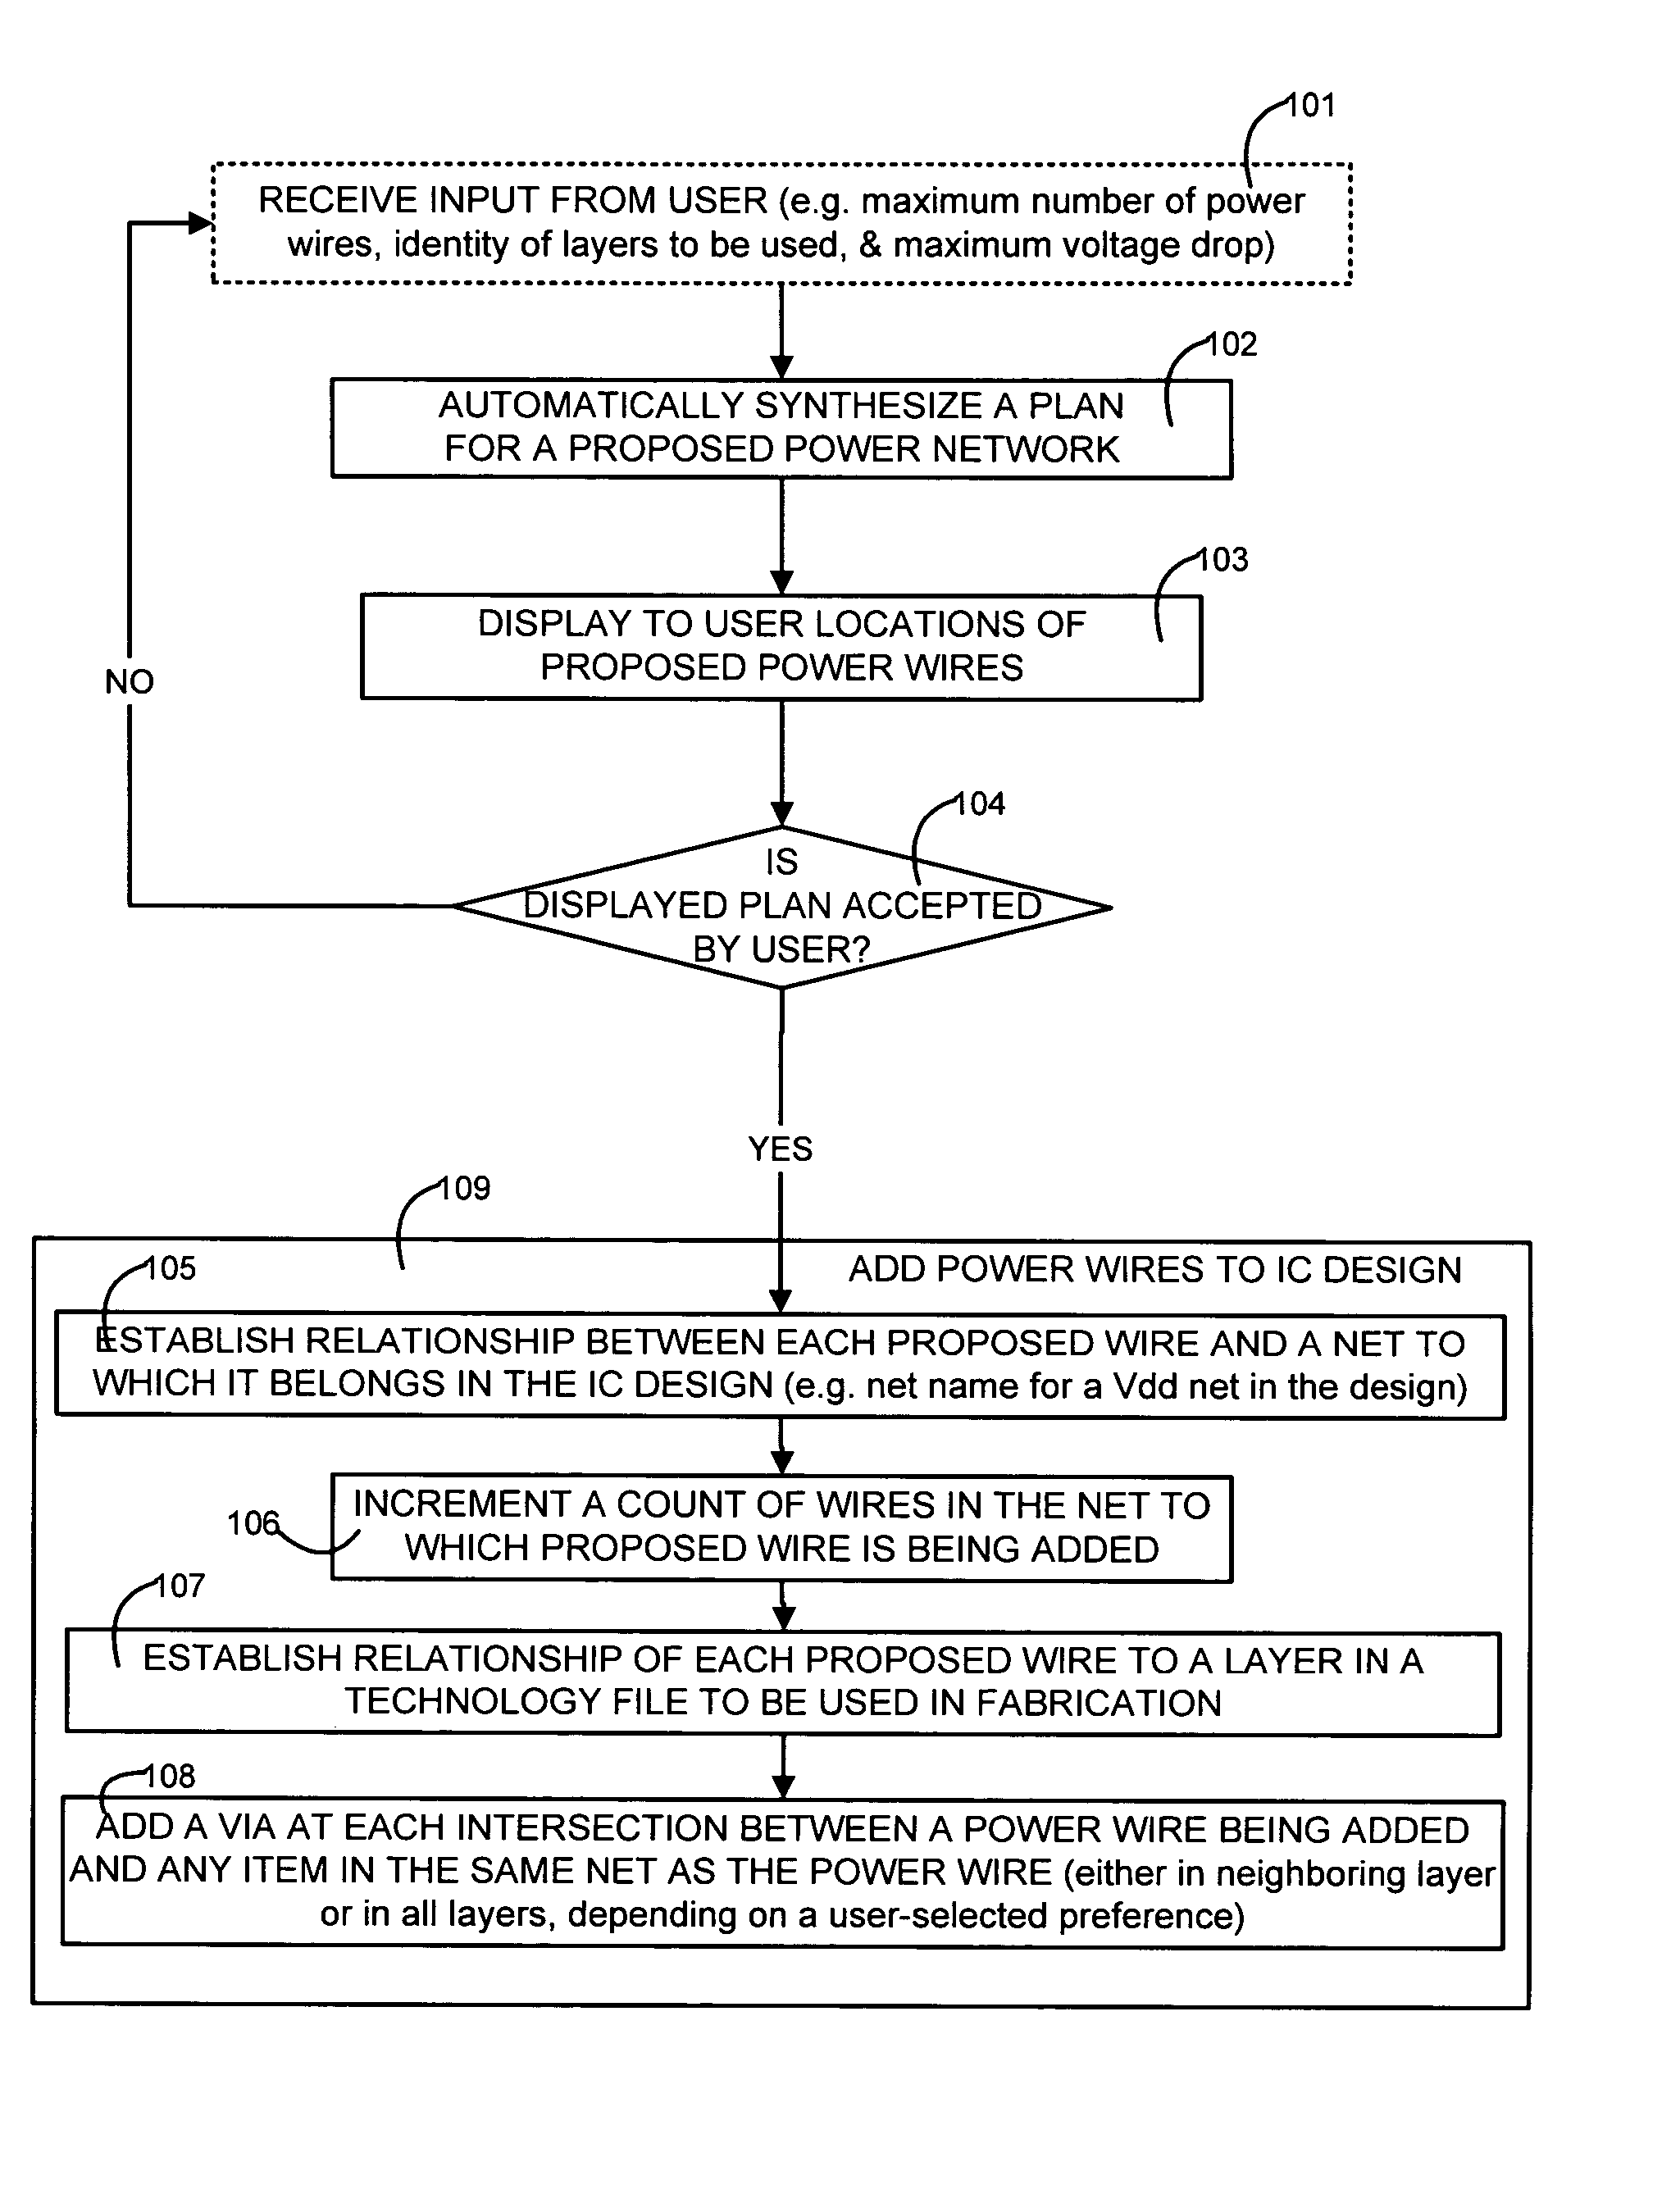 Power network synthesizer for an integrated circuit design